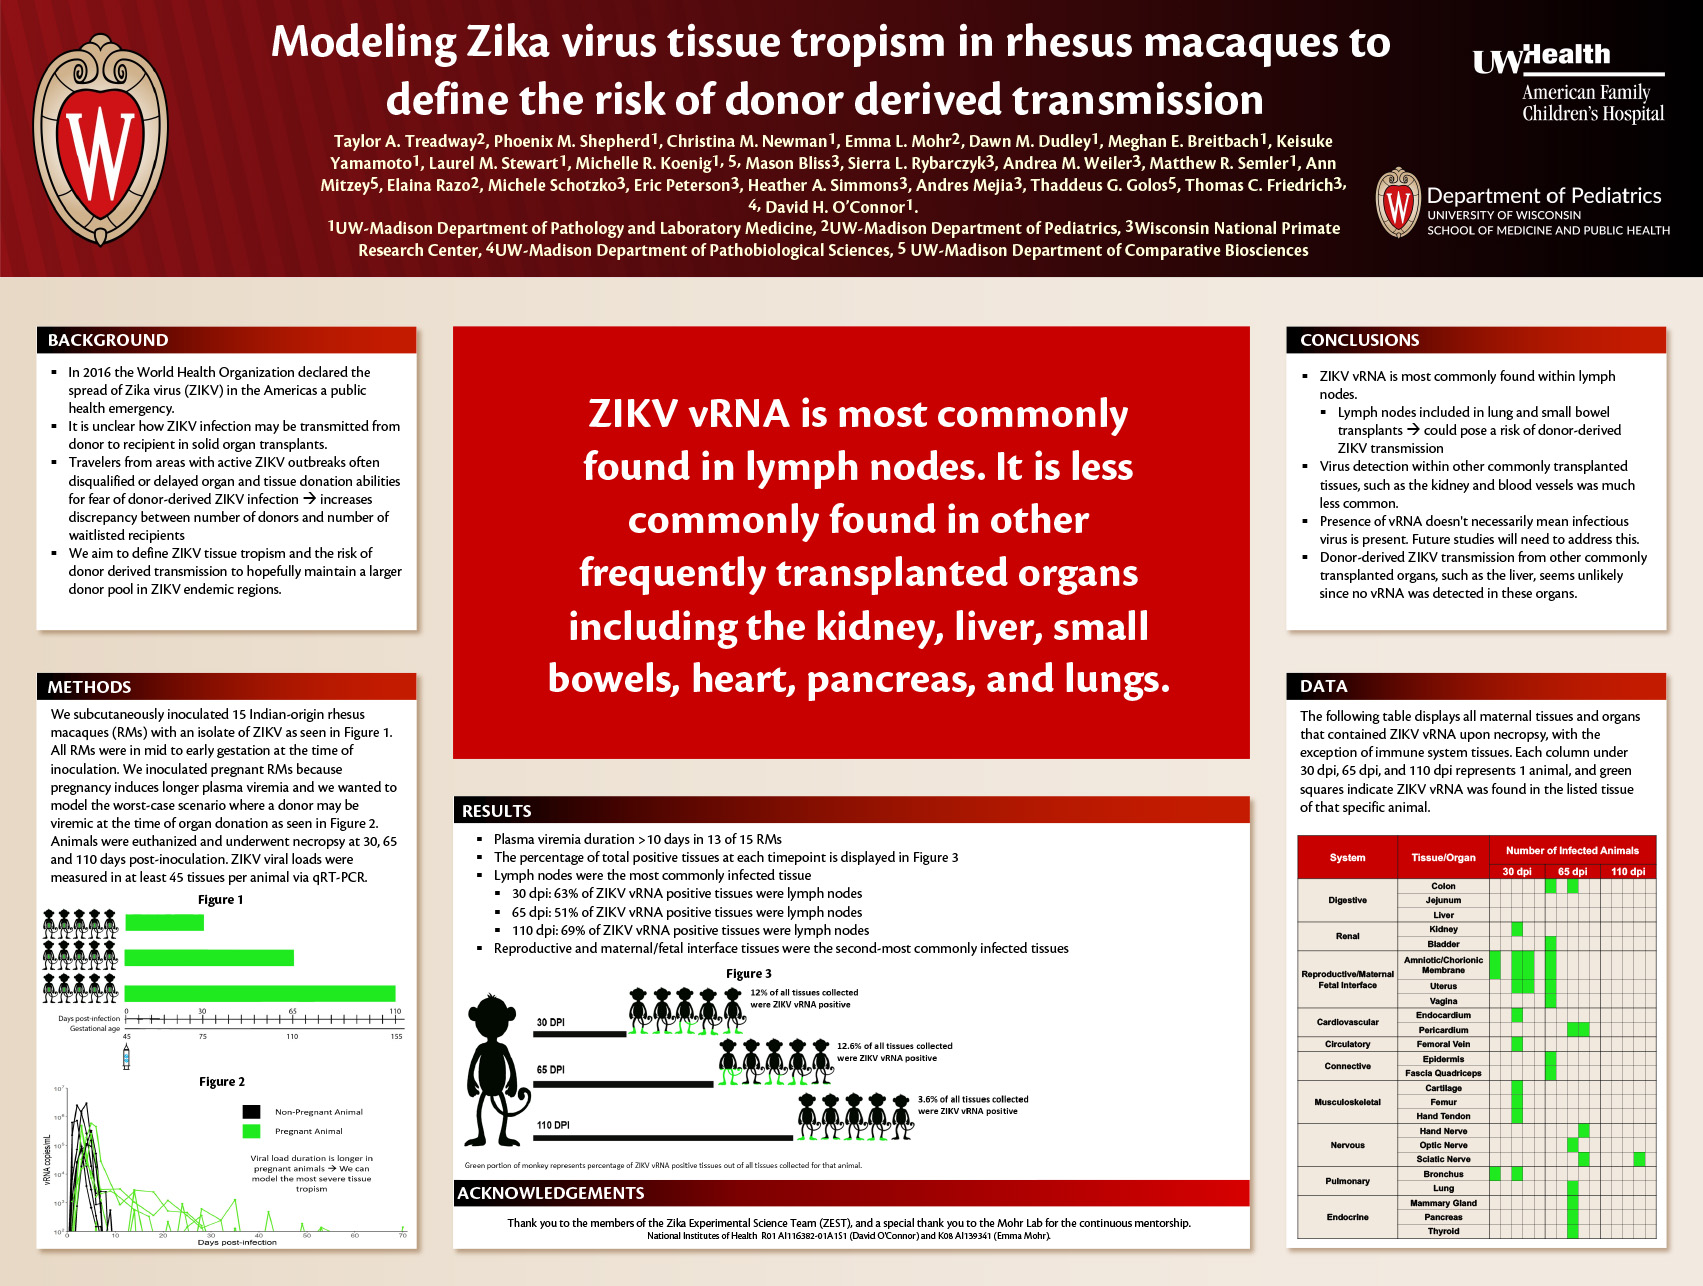 6.  Modeling Zika virus tissue tropism in rhesus macaques to define the risk of donor derived transmission poster image